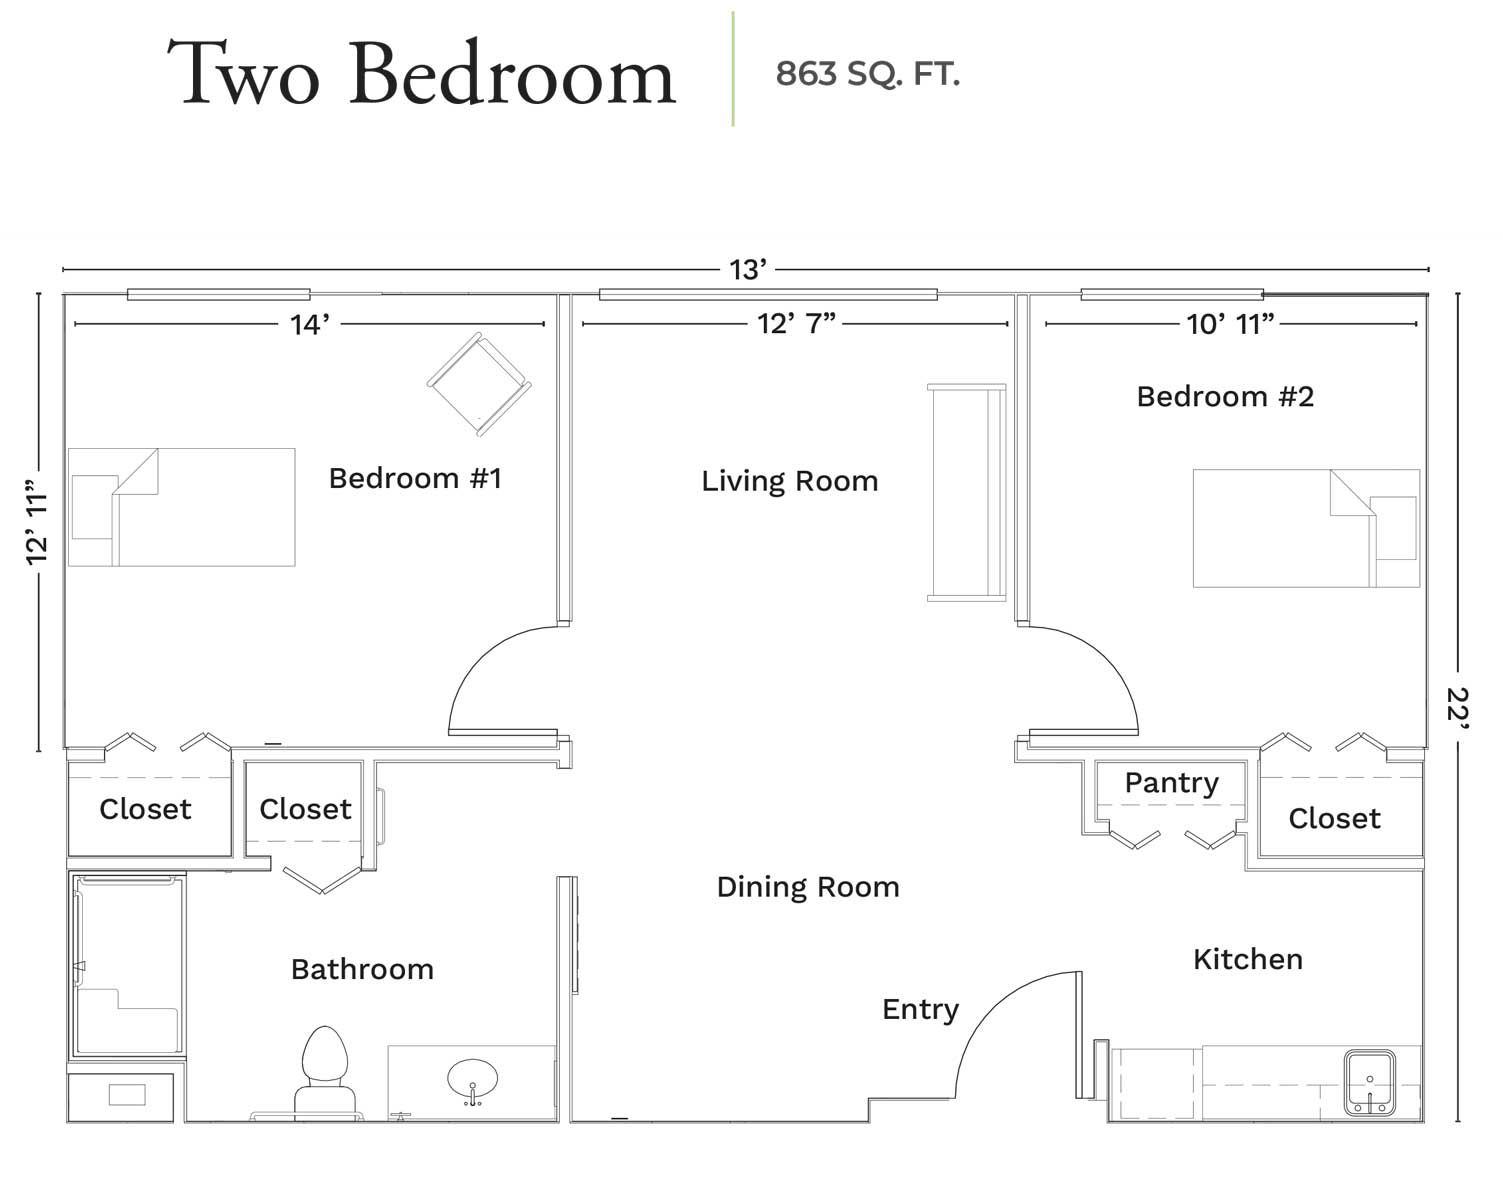 Floor plan of a two-bedroom, 863 sq. ft. apartment with labeled rooms and dimensions.